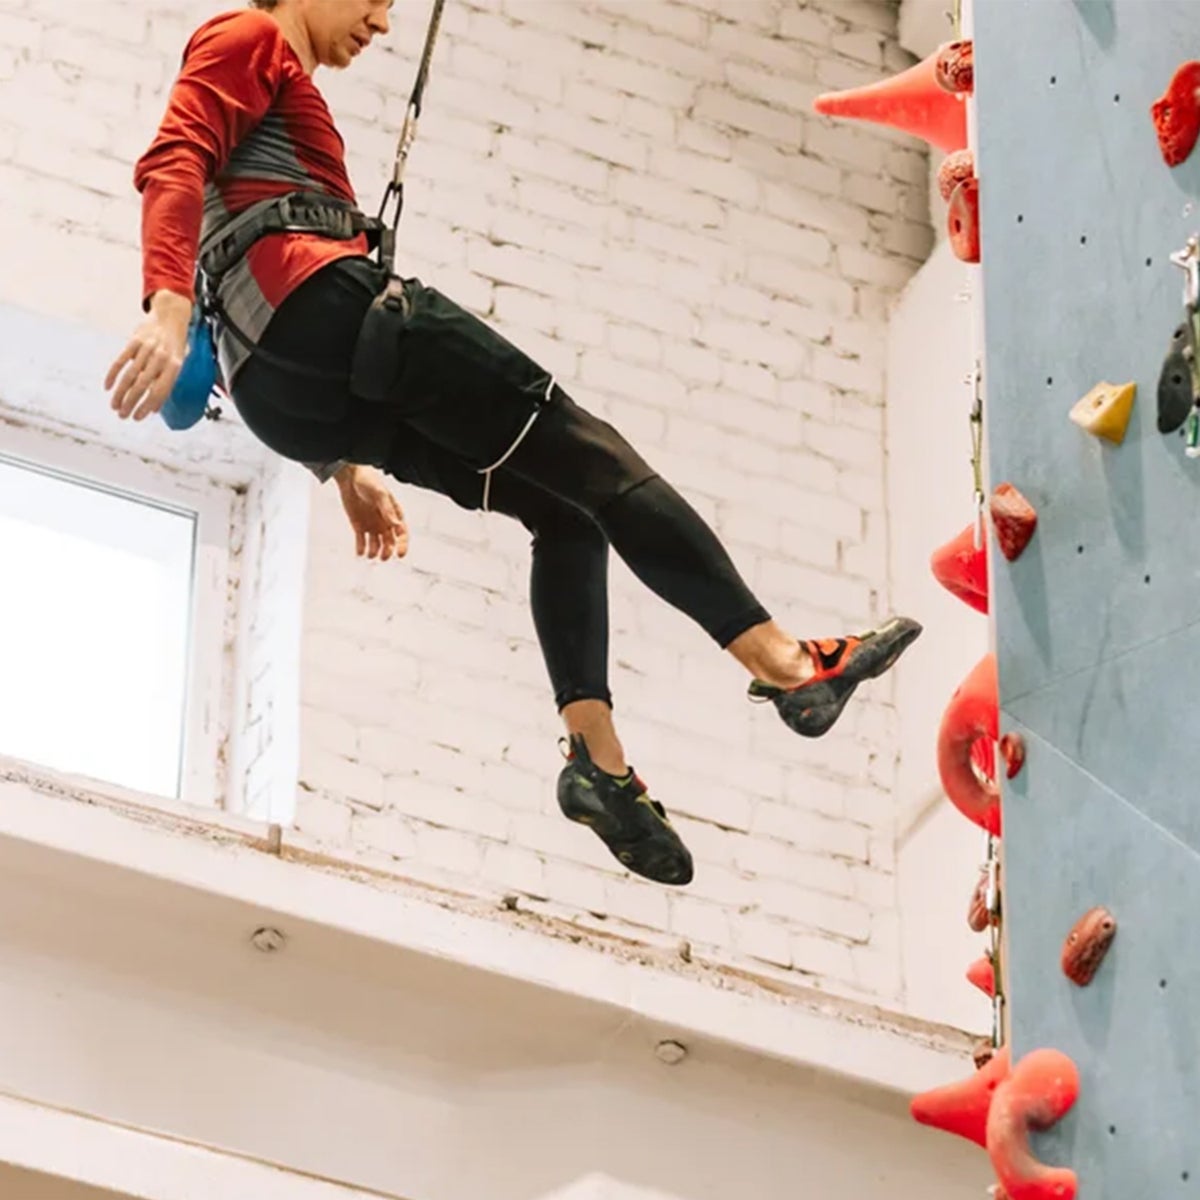 Gym and Auto Belay Manufacturer to Pay $6M in Settlement for Auto Belay Accident